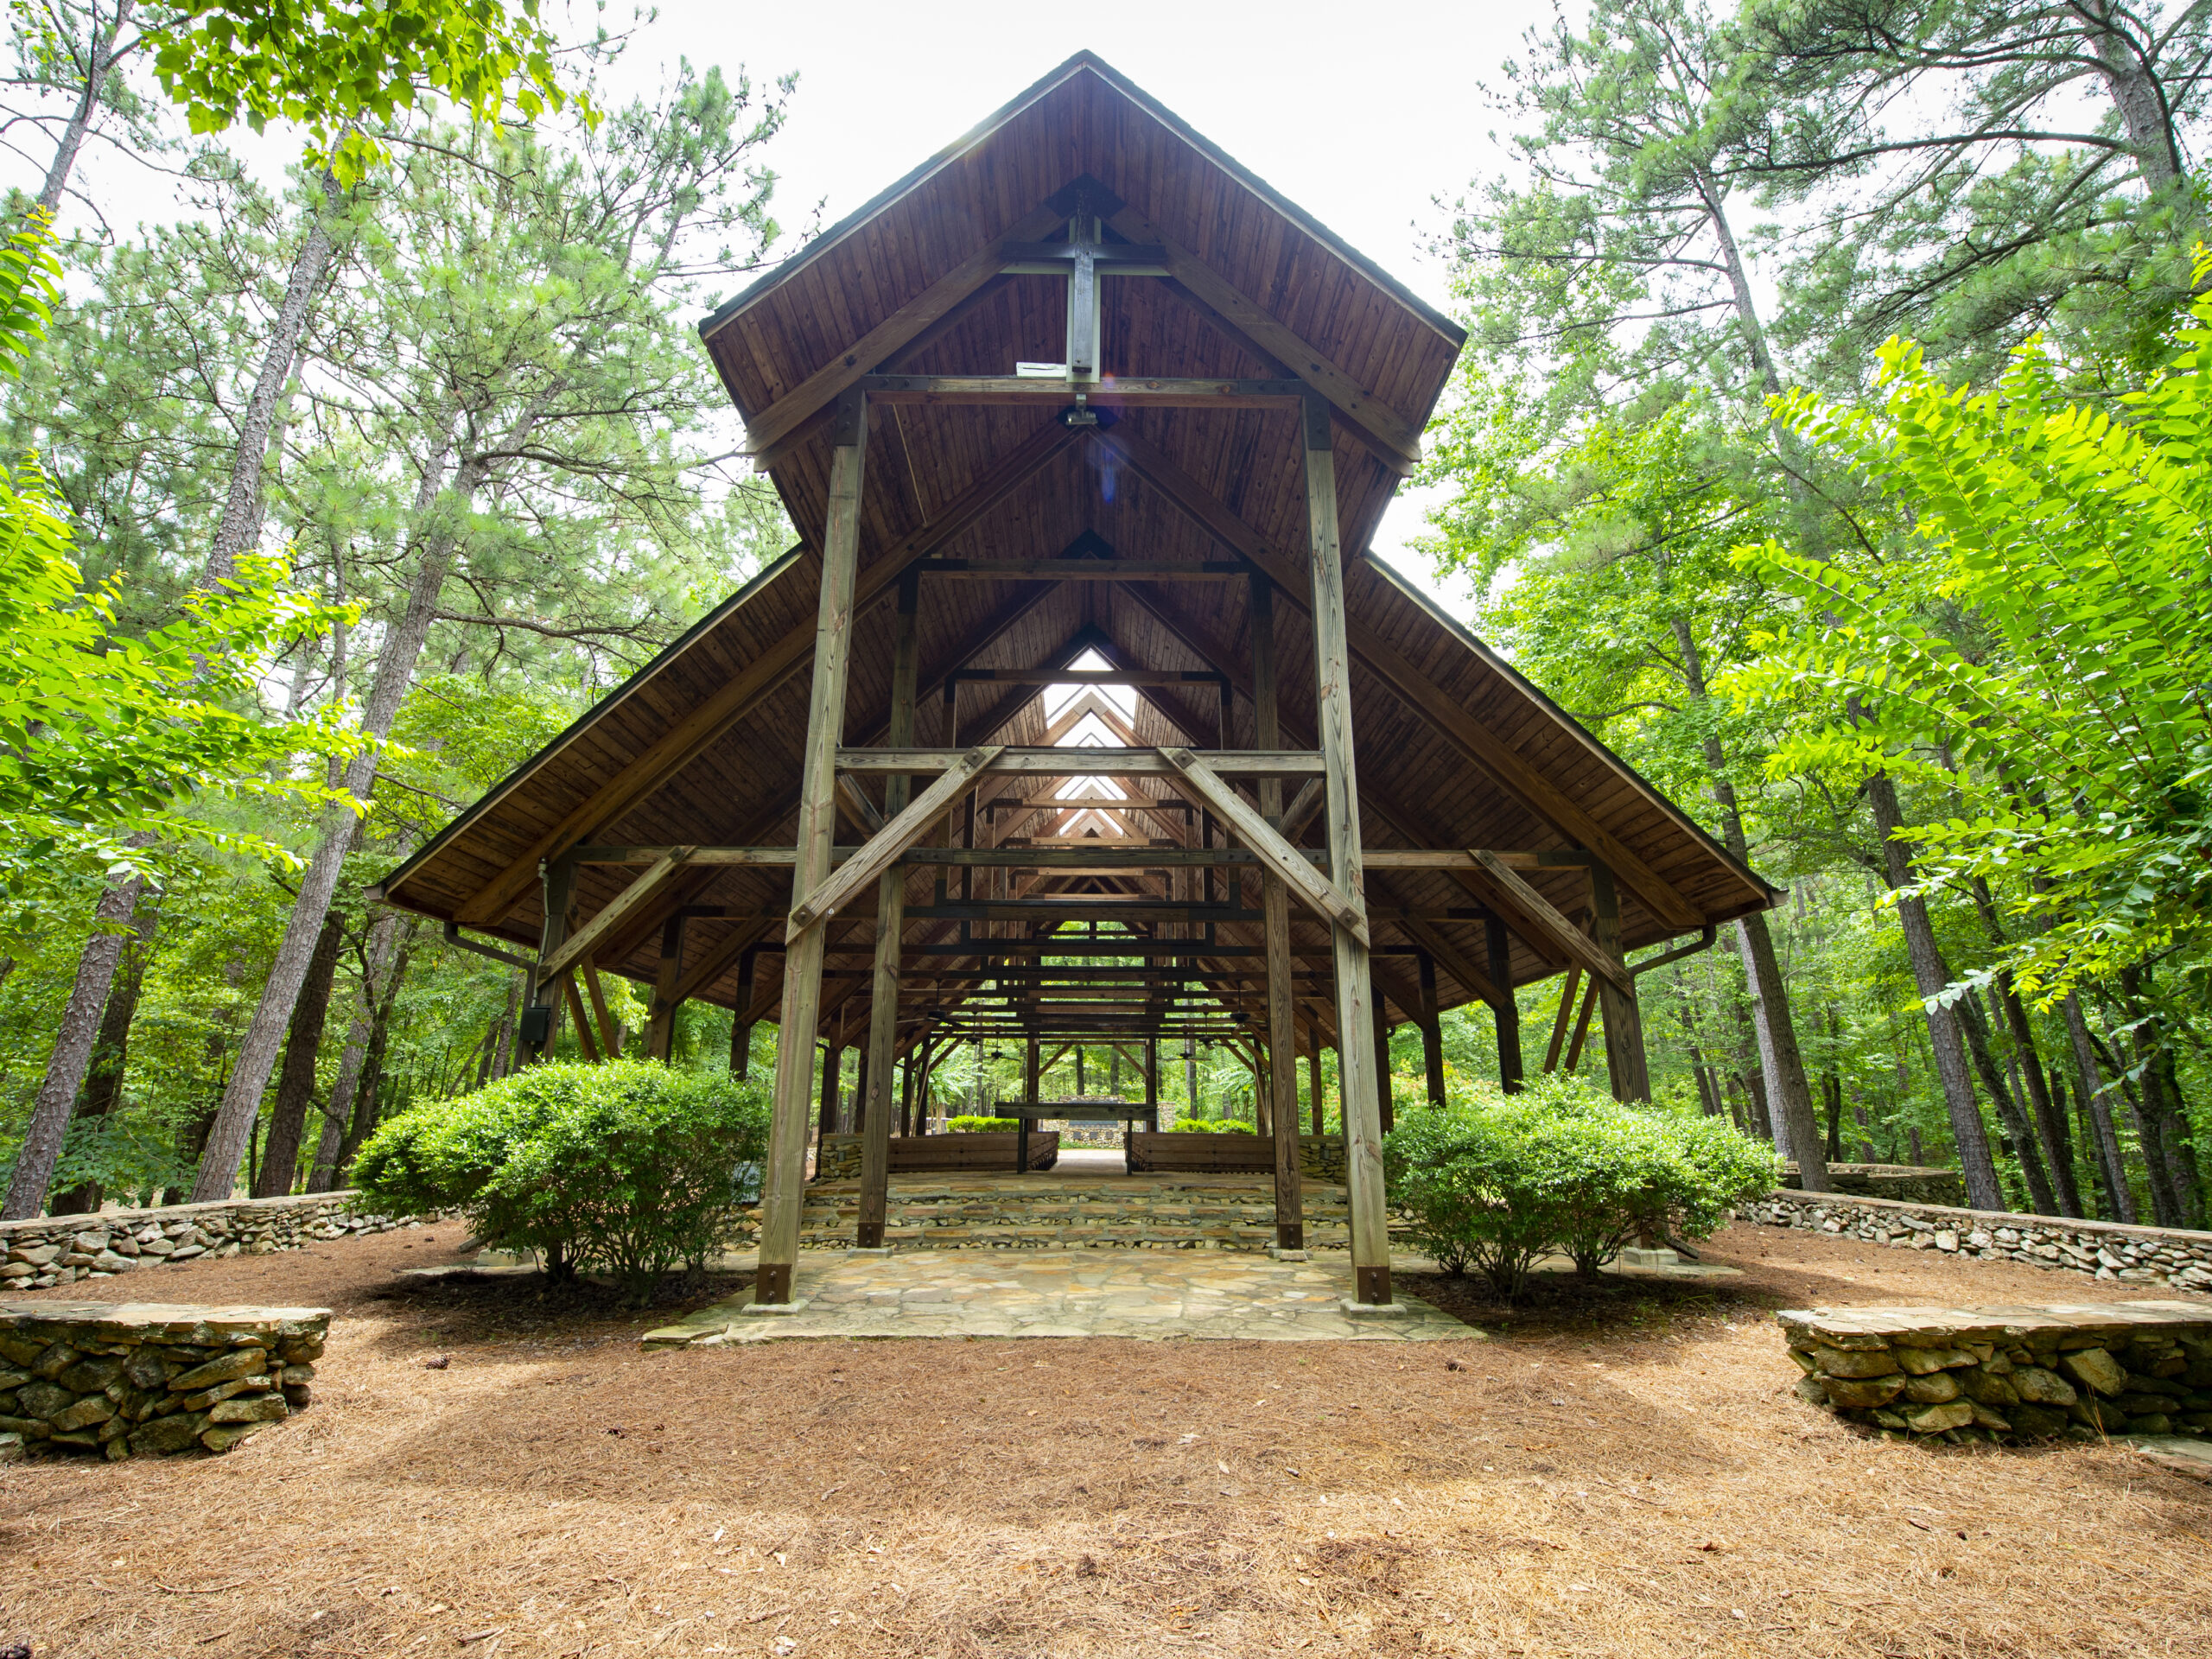 The Chapel at the Alabama 4-H Center